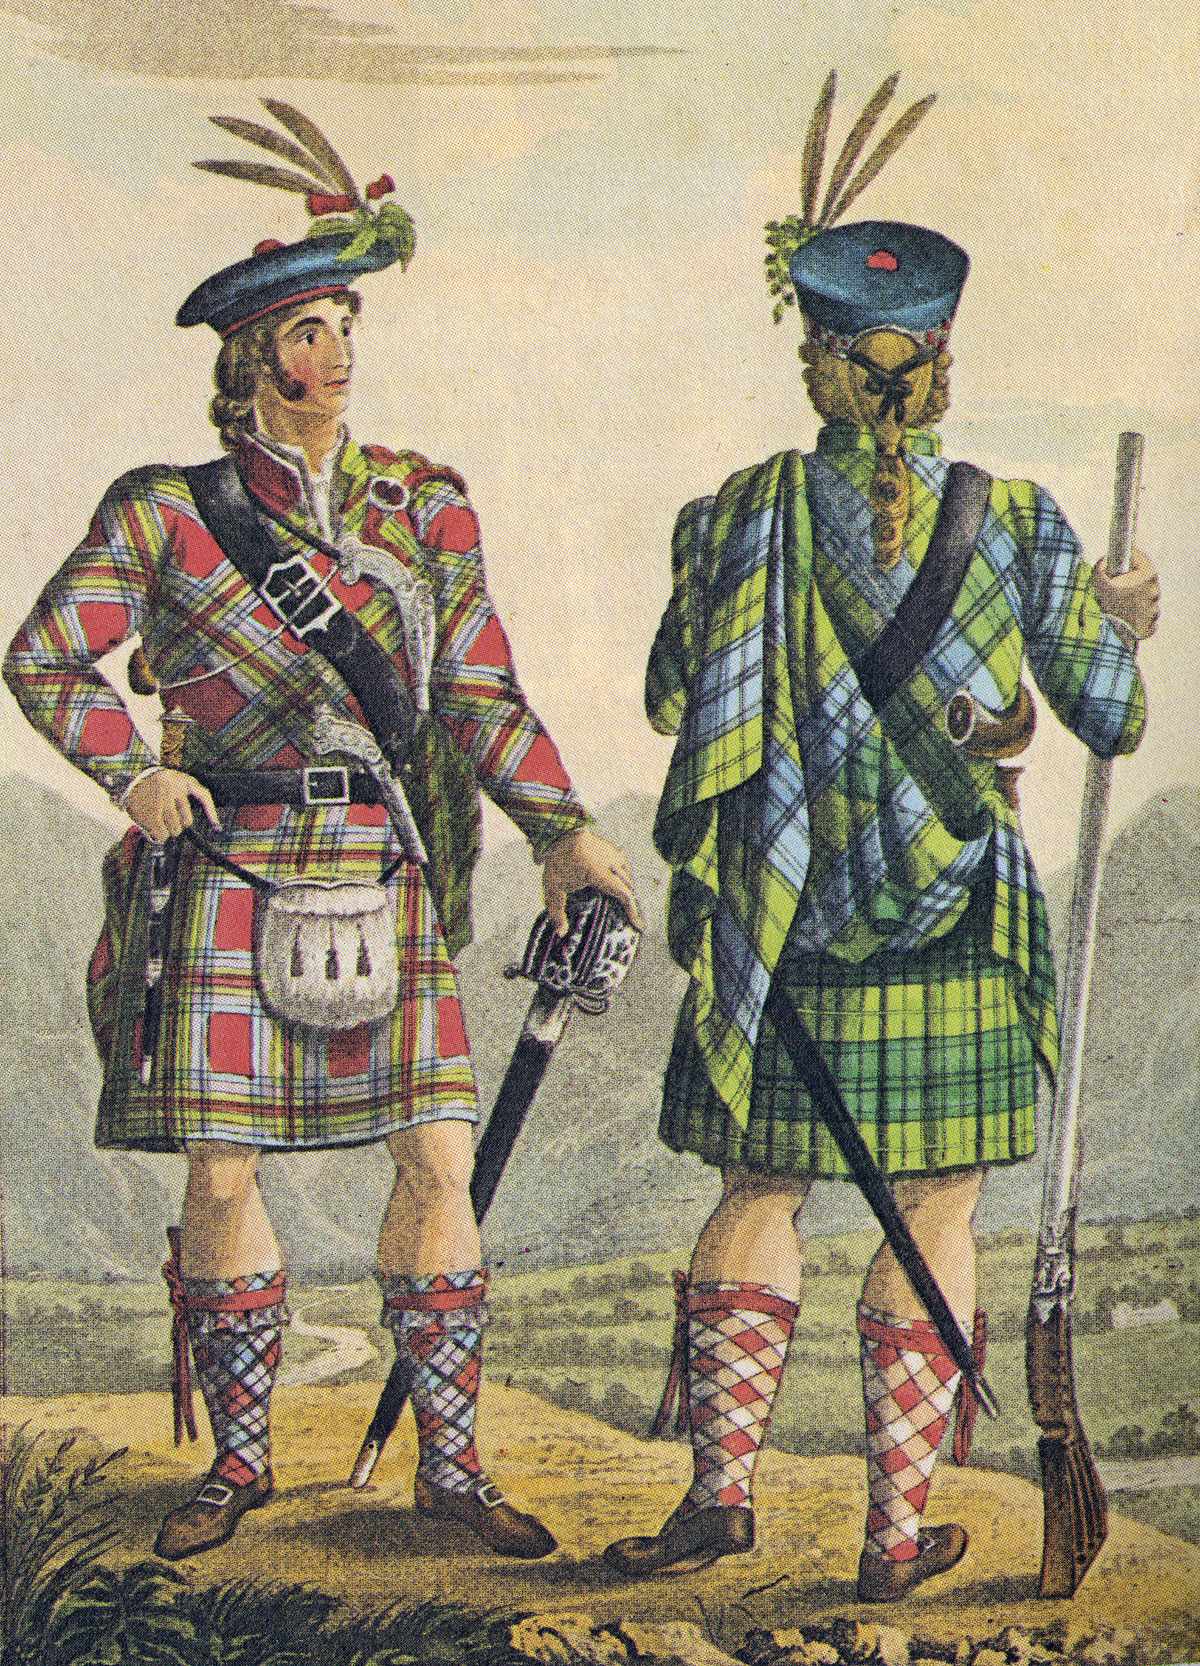 Mad for Plaid: The Intricacies of Plaid Throughout History